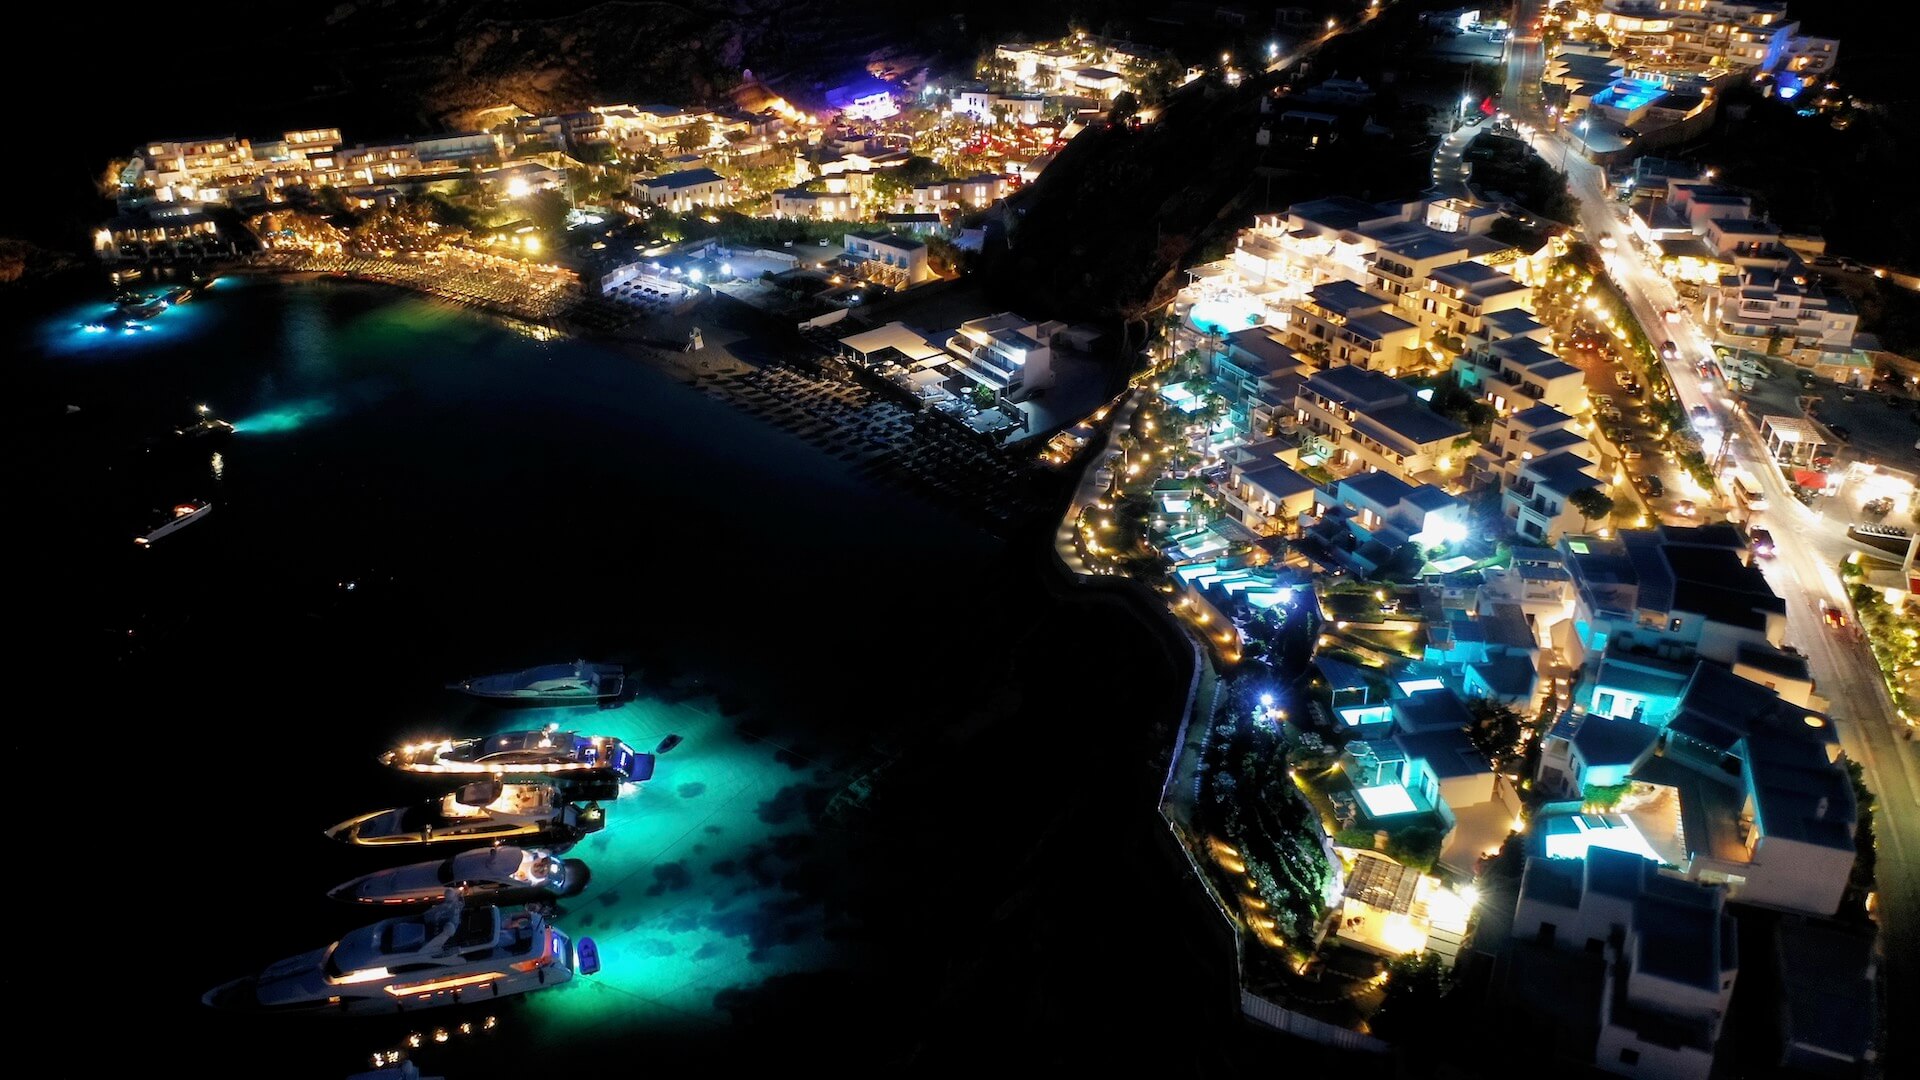 The coast of Mykonos at night, photographed from the air